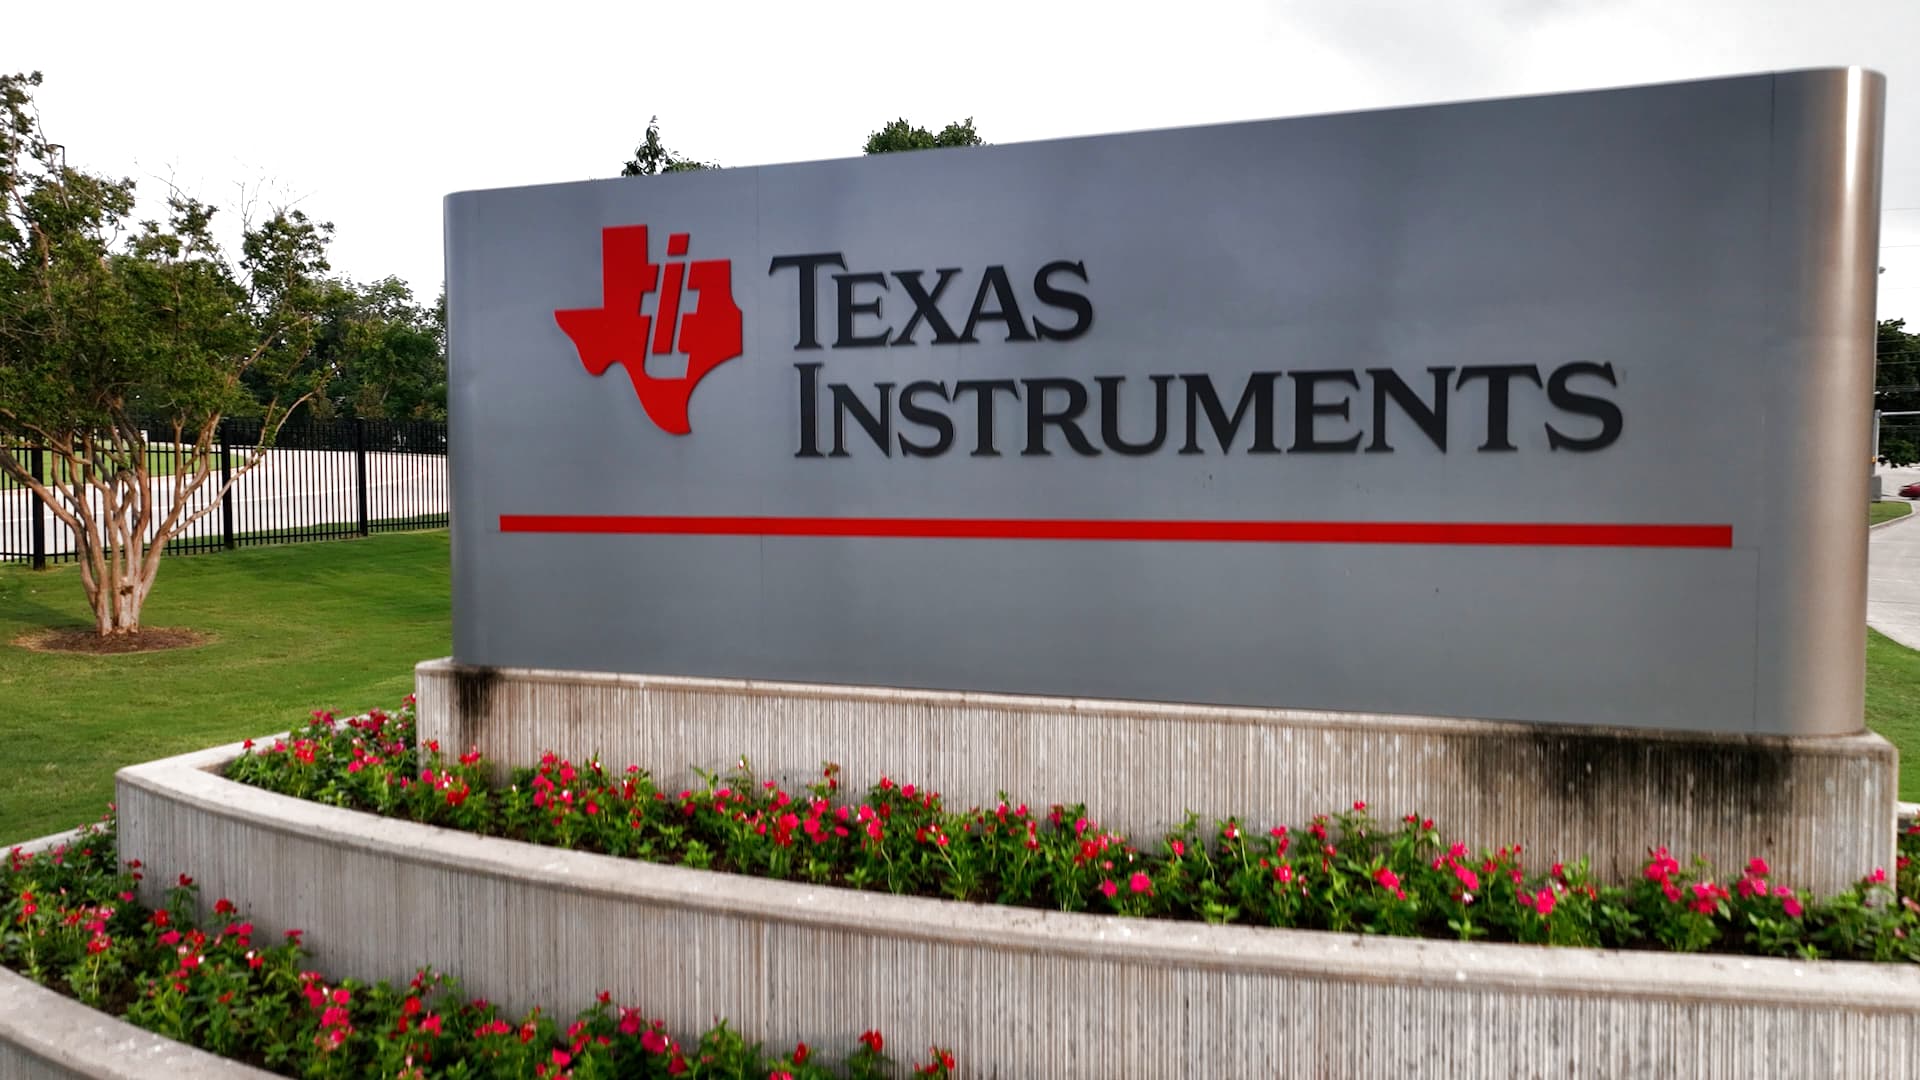 How Samsung and Texas Instruments made the Lone Star State the hub of U.S. chip manufacturing